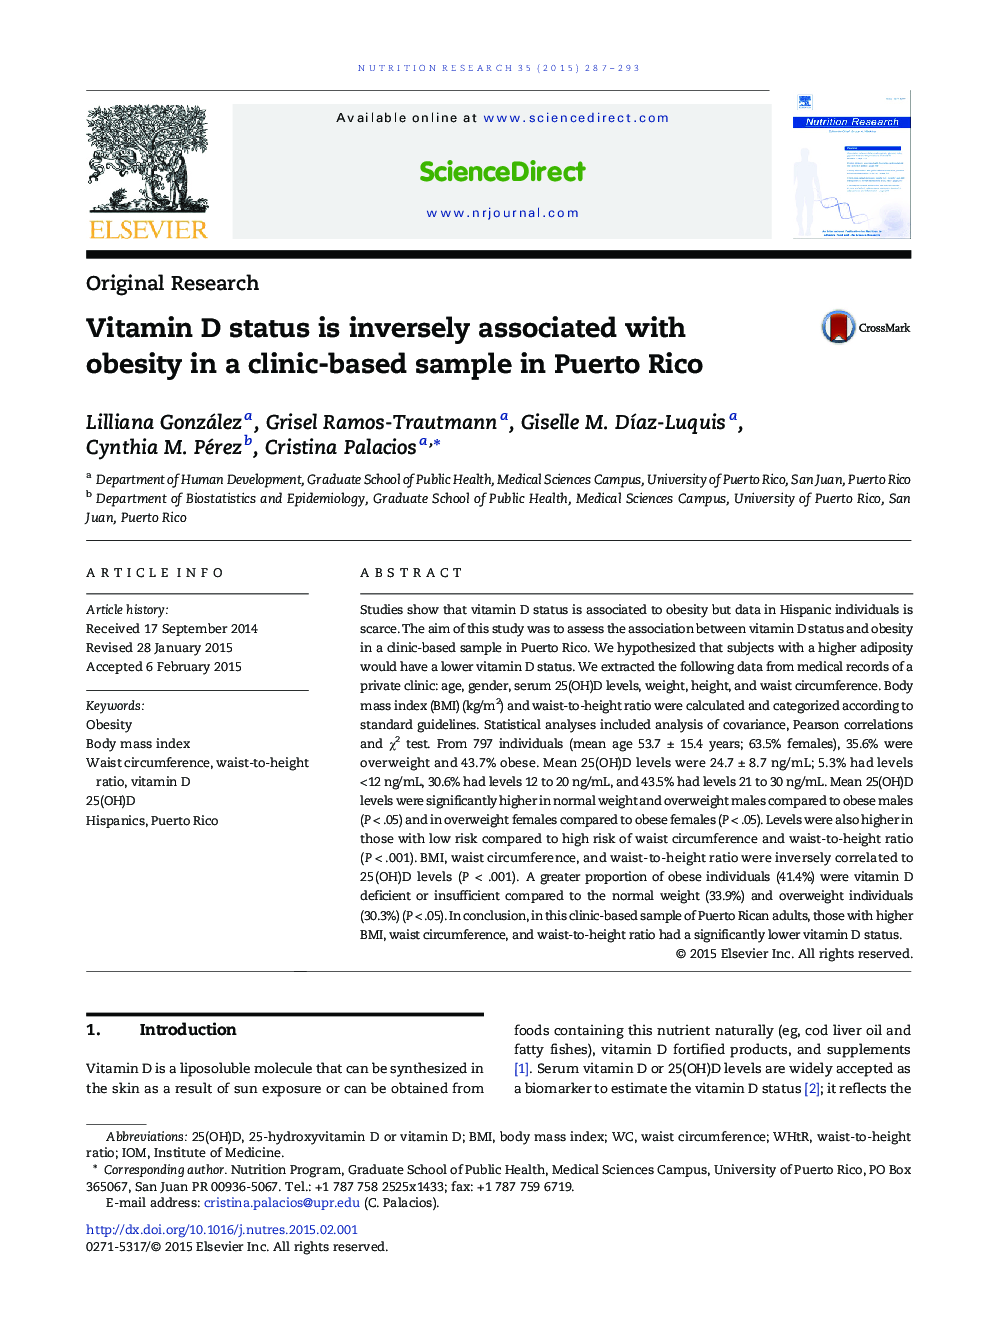 Vitamin D status is inversely associated with obesity in a clinic-based sample in Puerto Rico